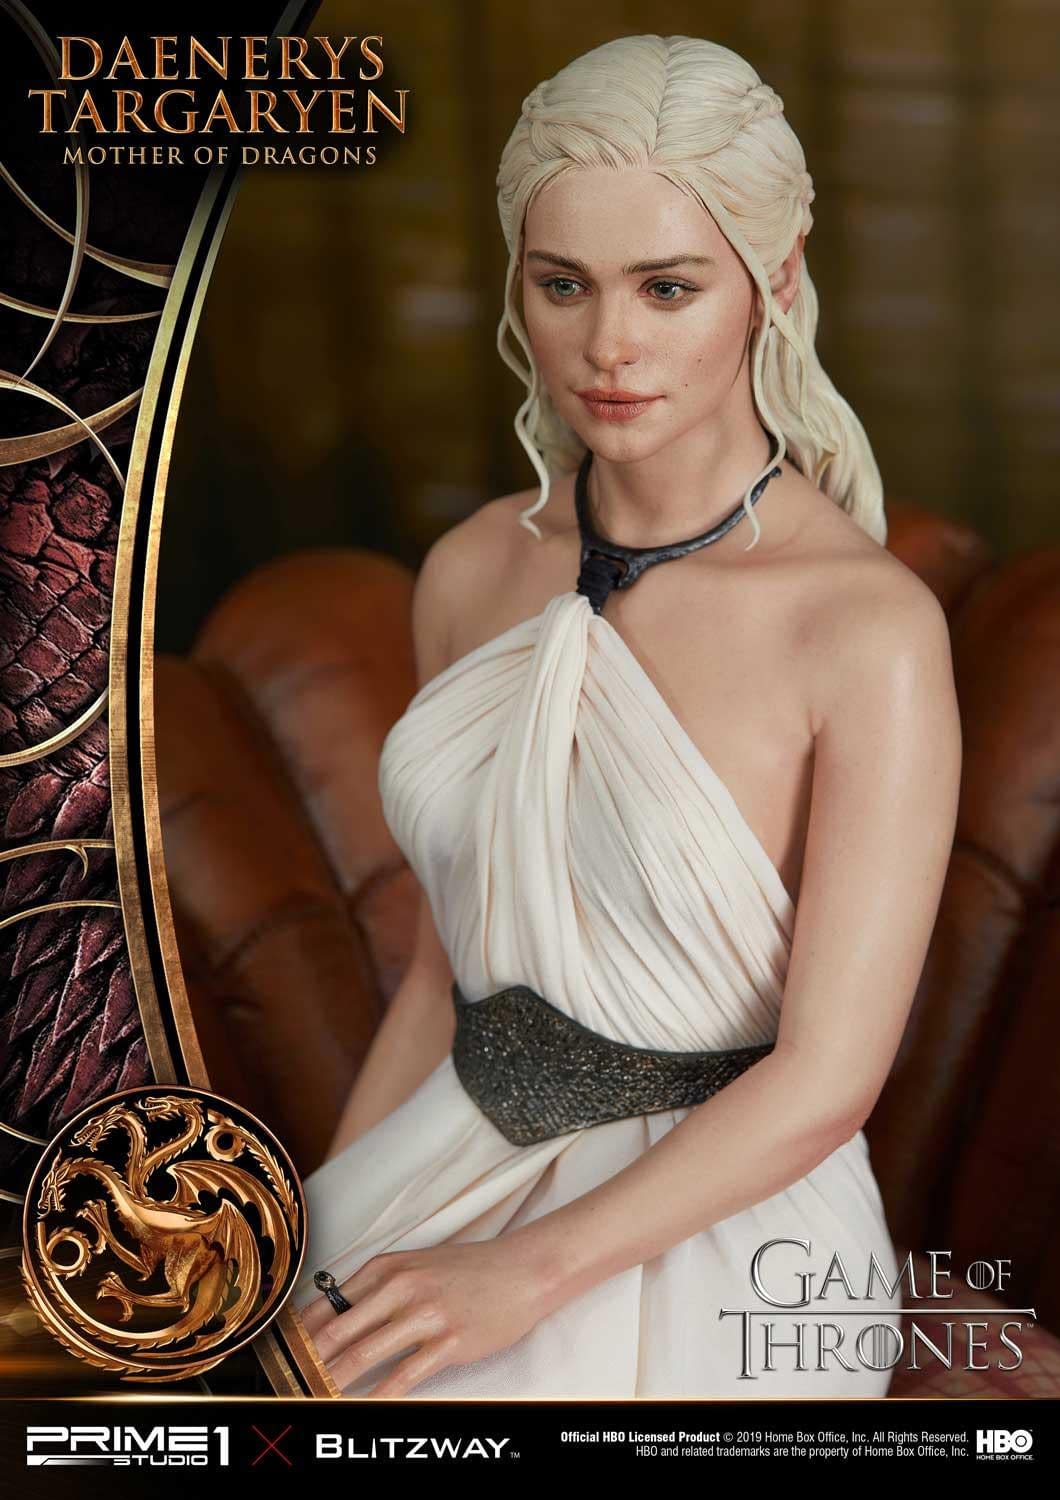 Daenerys Targaryen is the Mother of Dragons in the New Team-Up Statue